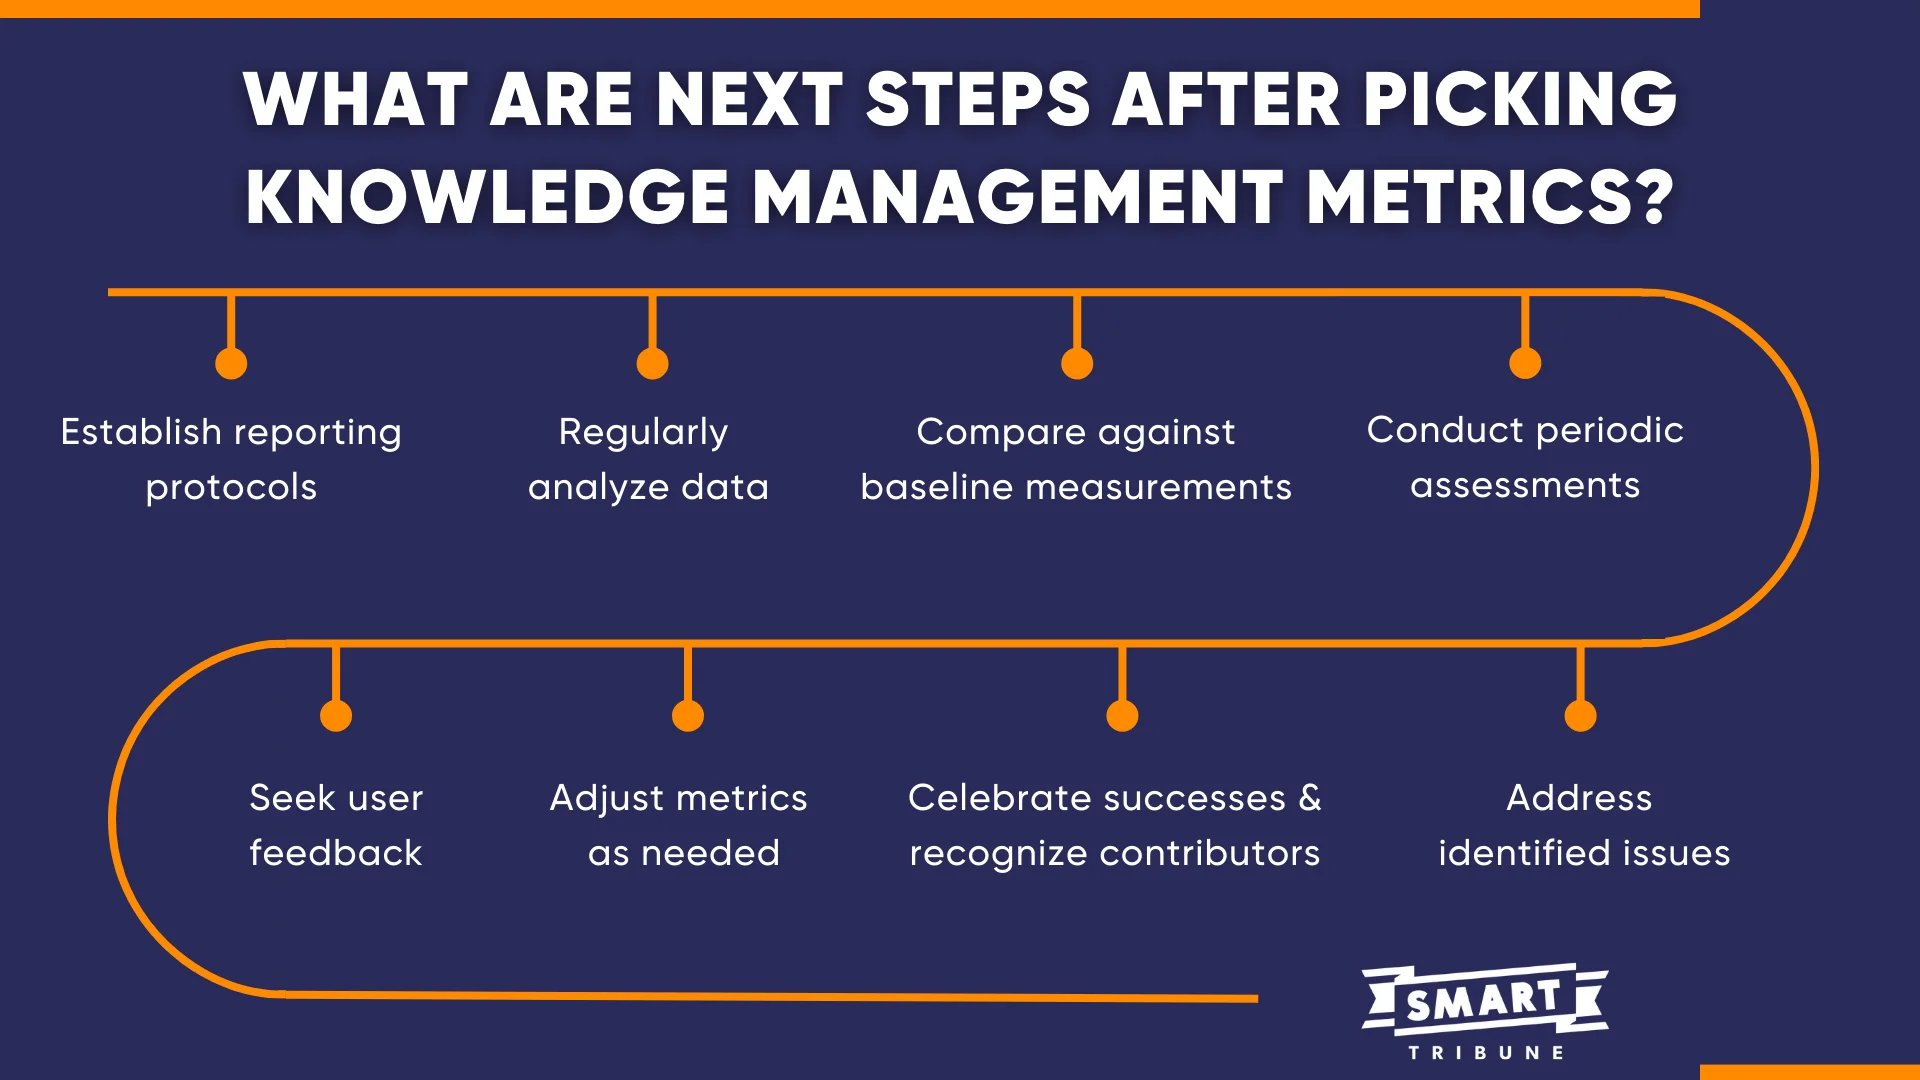 What Are Next Steps After Picking Knowledge Management Metrics